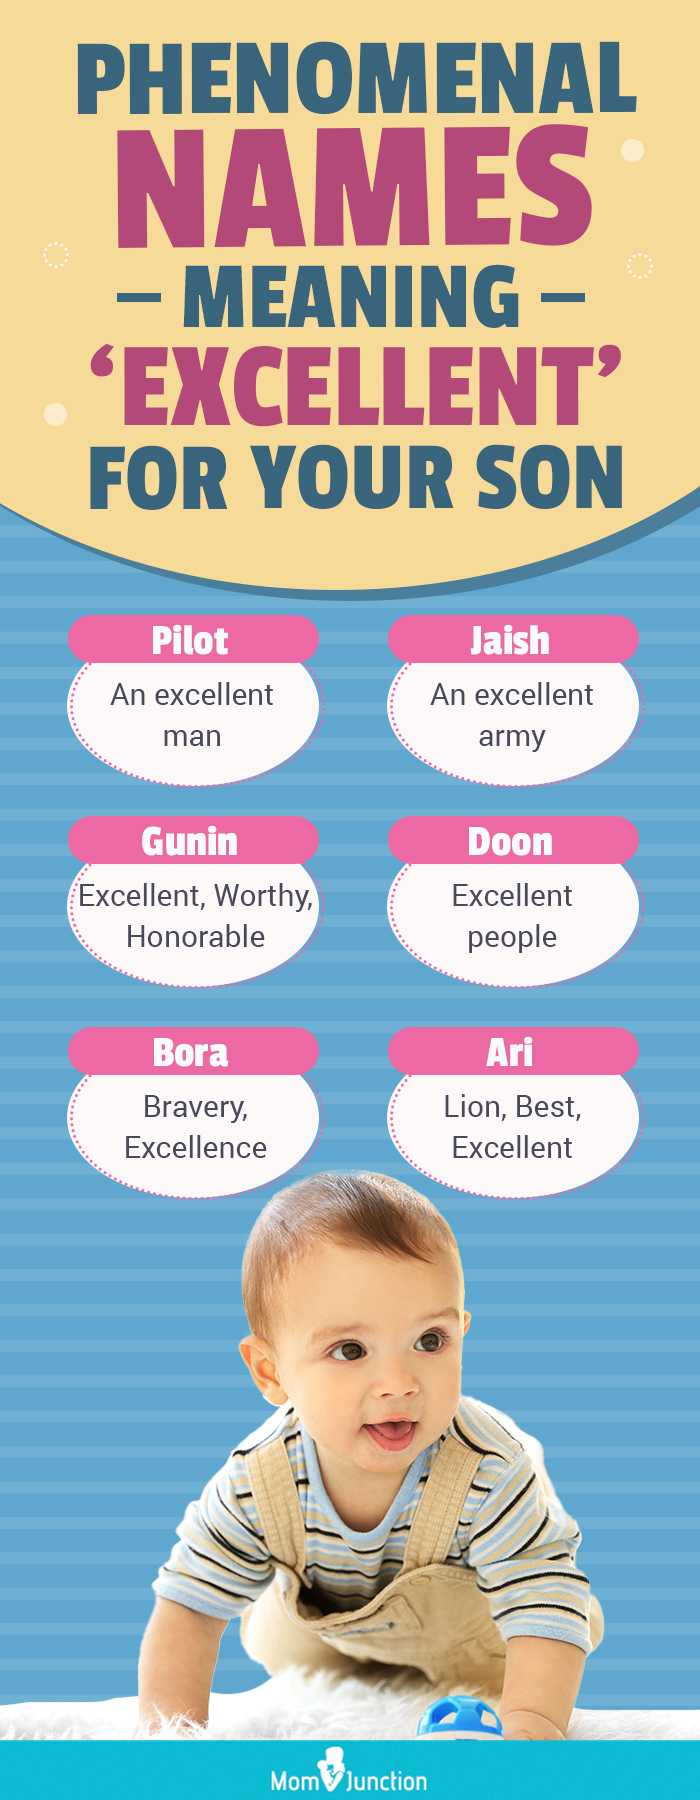 Phenomenal Names Meaning Excellent For Your Son (infographic)